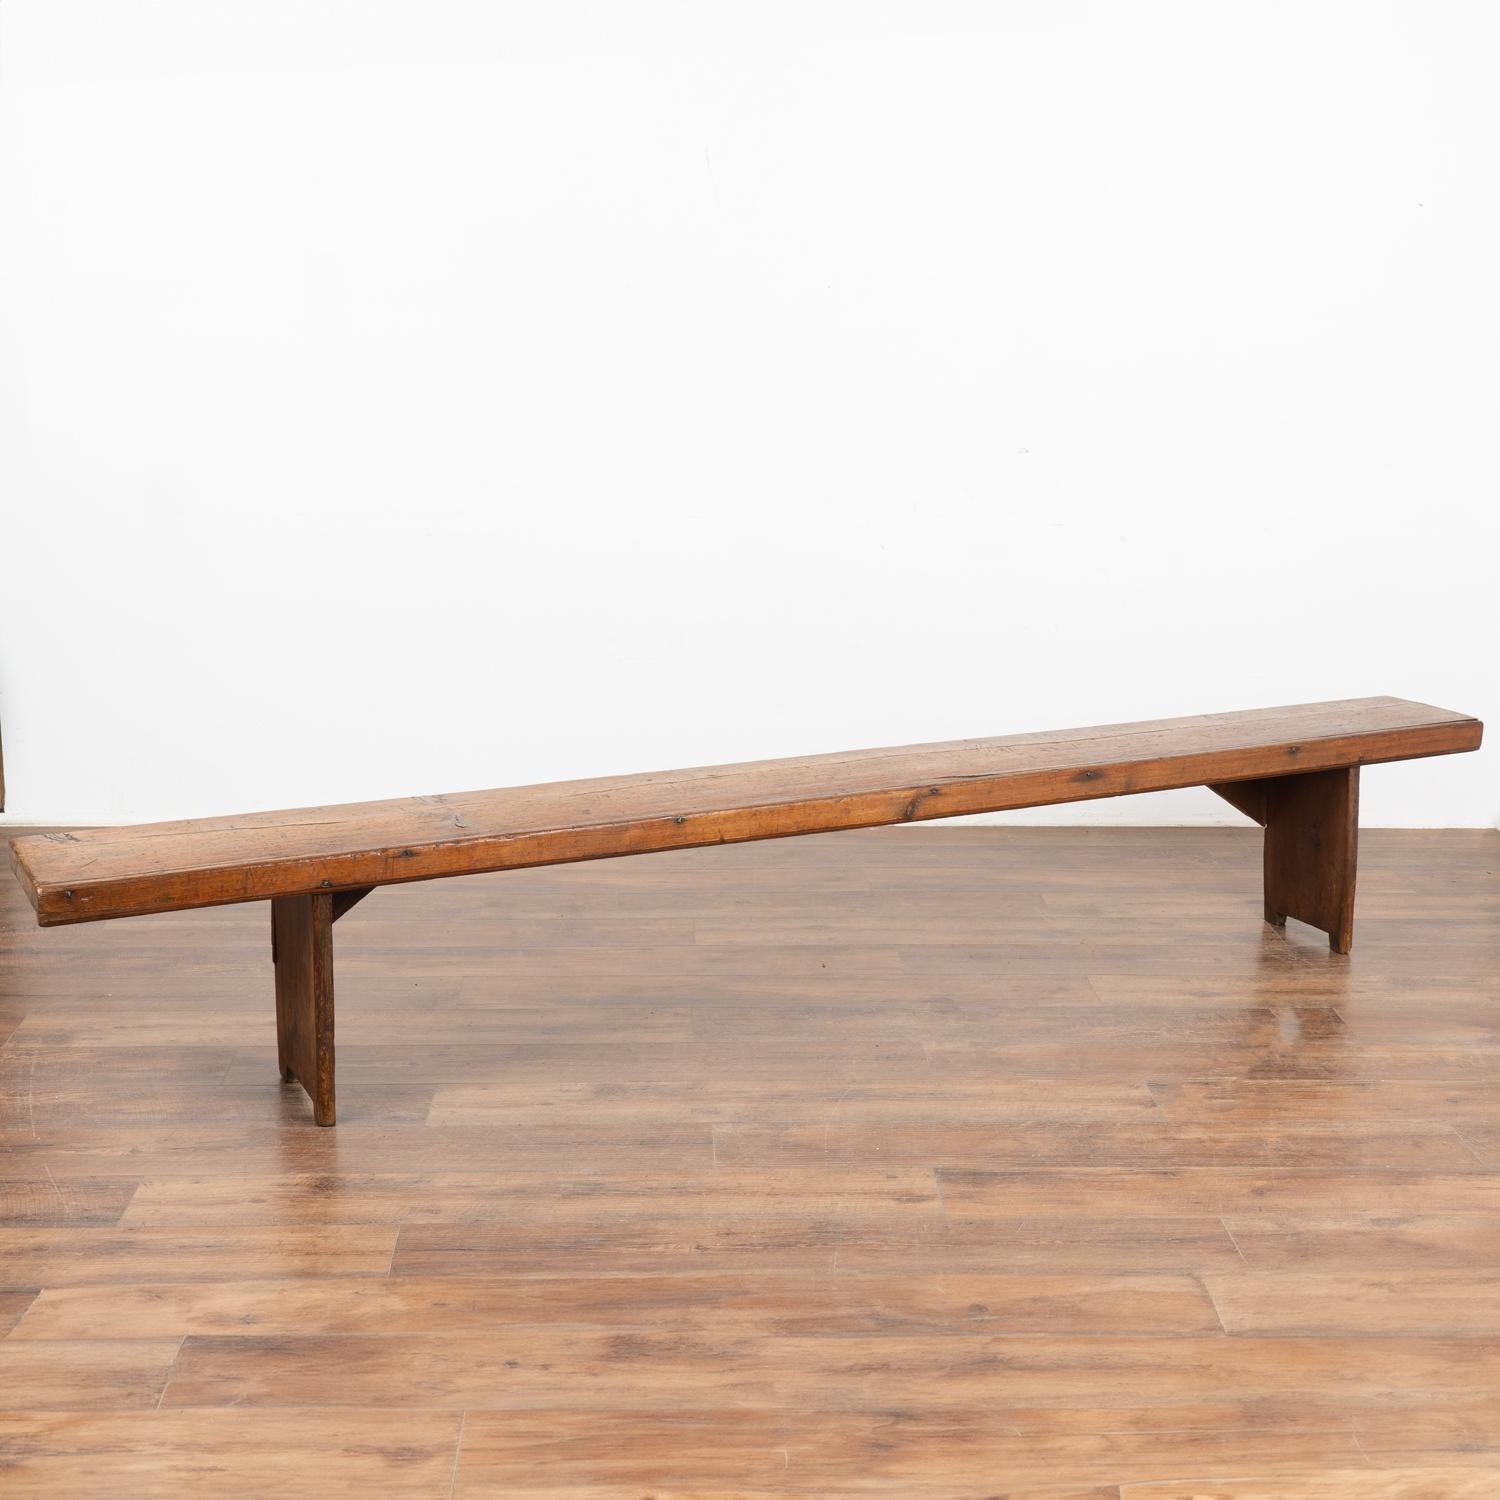 Rustic narrow 9' plank top bench with deep aged patina.
The top reveals generations of use with nicks, cracks, stains and scuffs which add character to the narrow bench.
Restored and waxed, this bench is strong, stable and ready for use. 
All